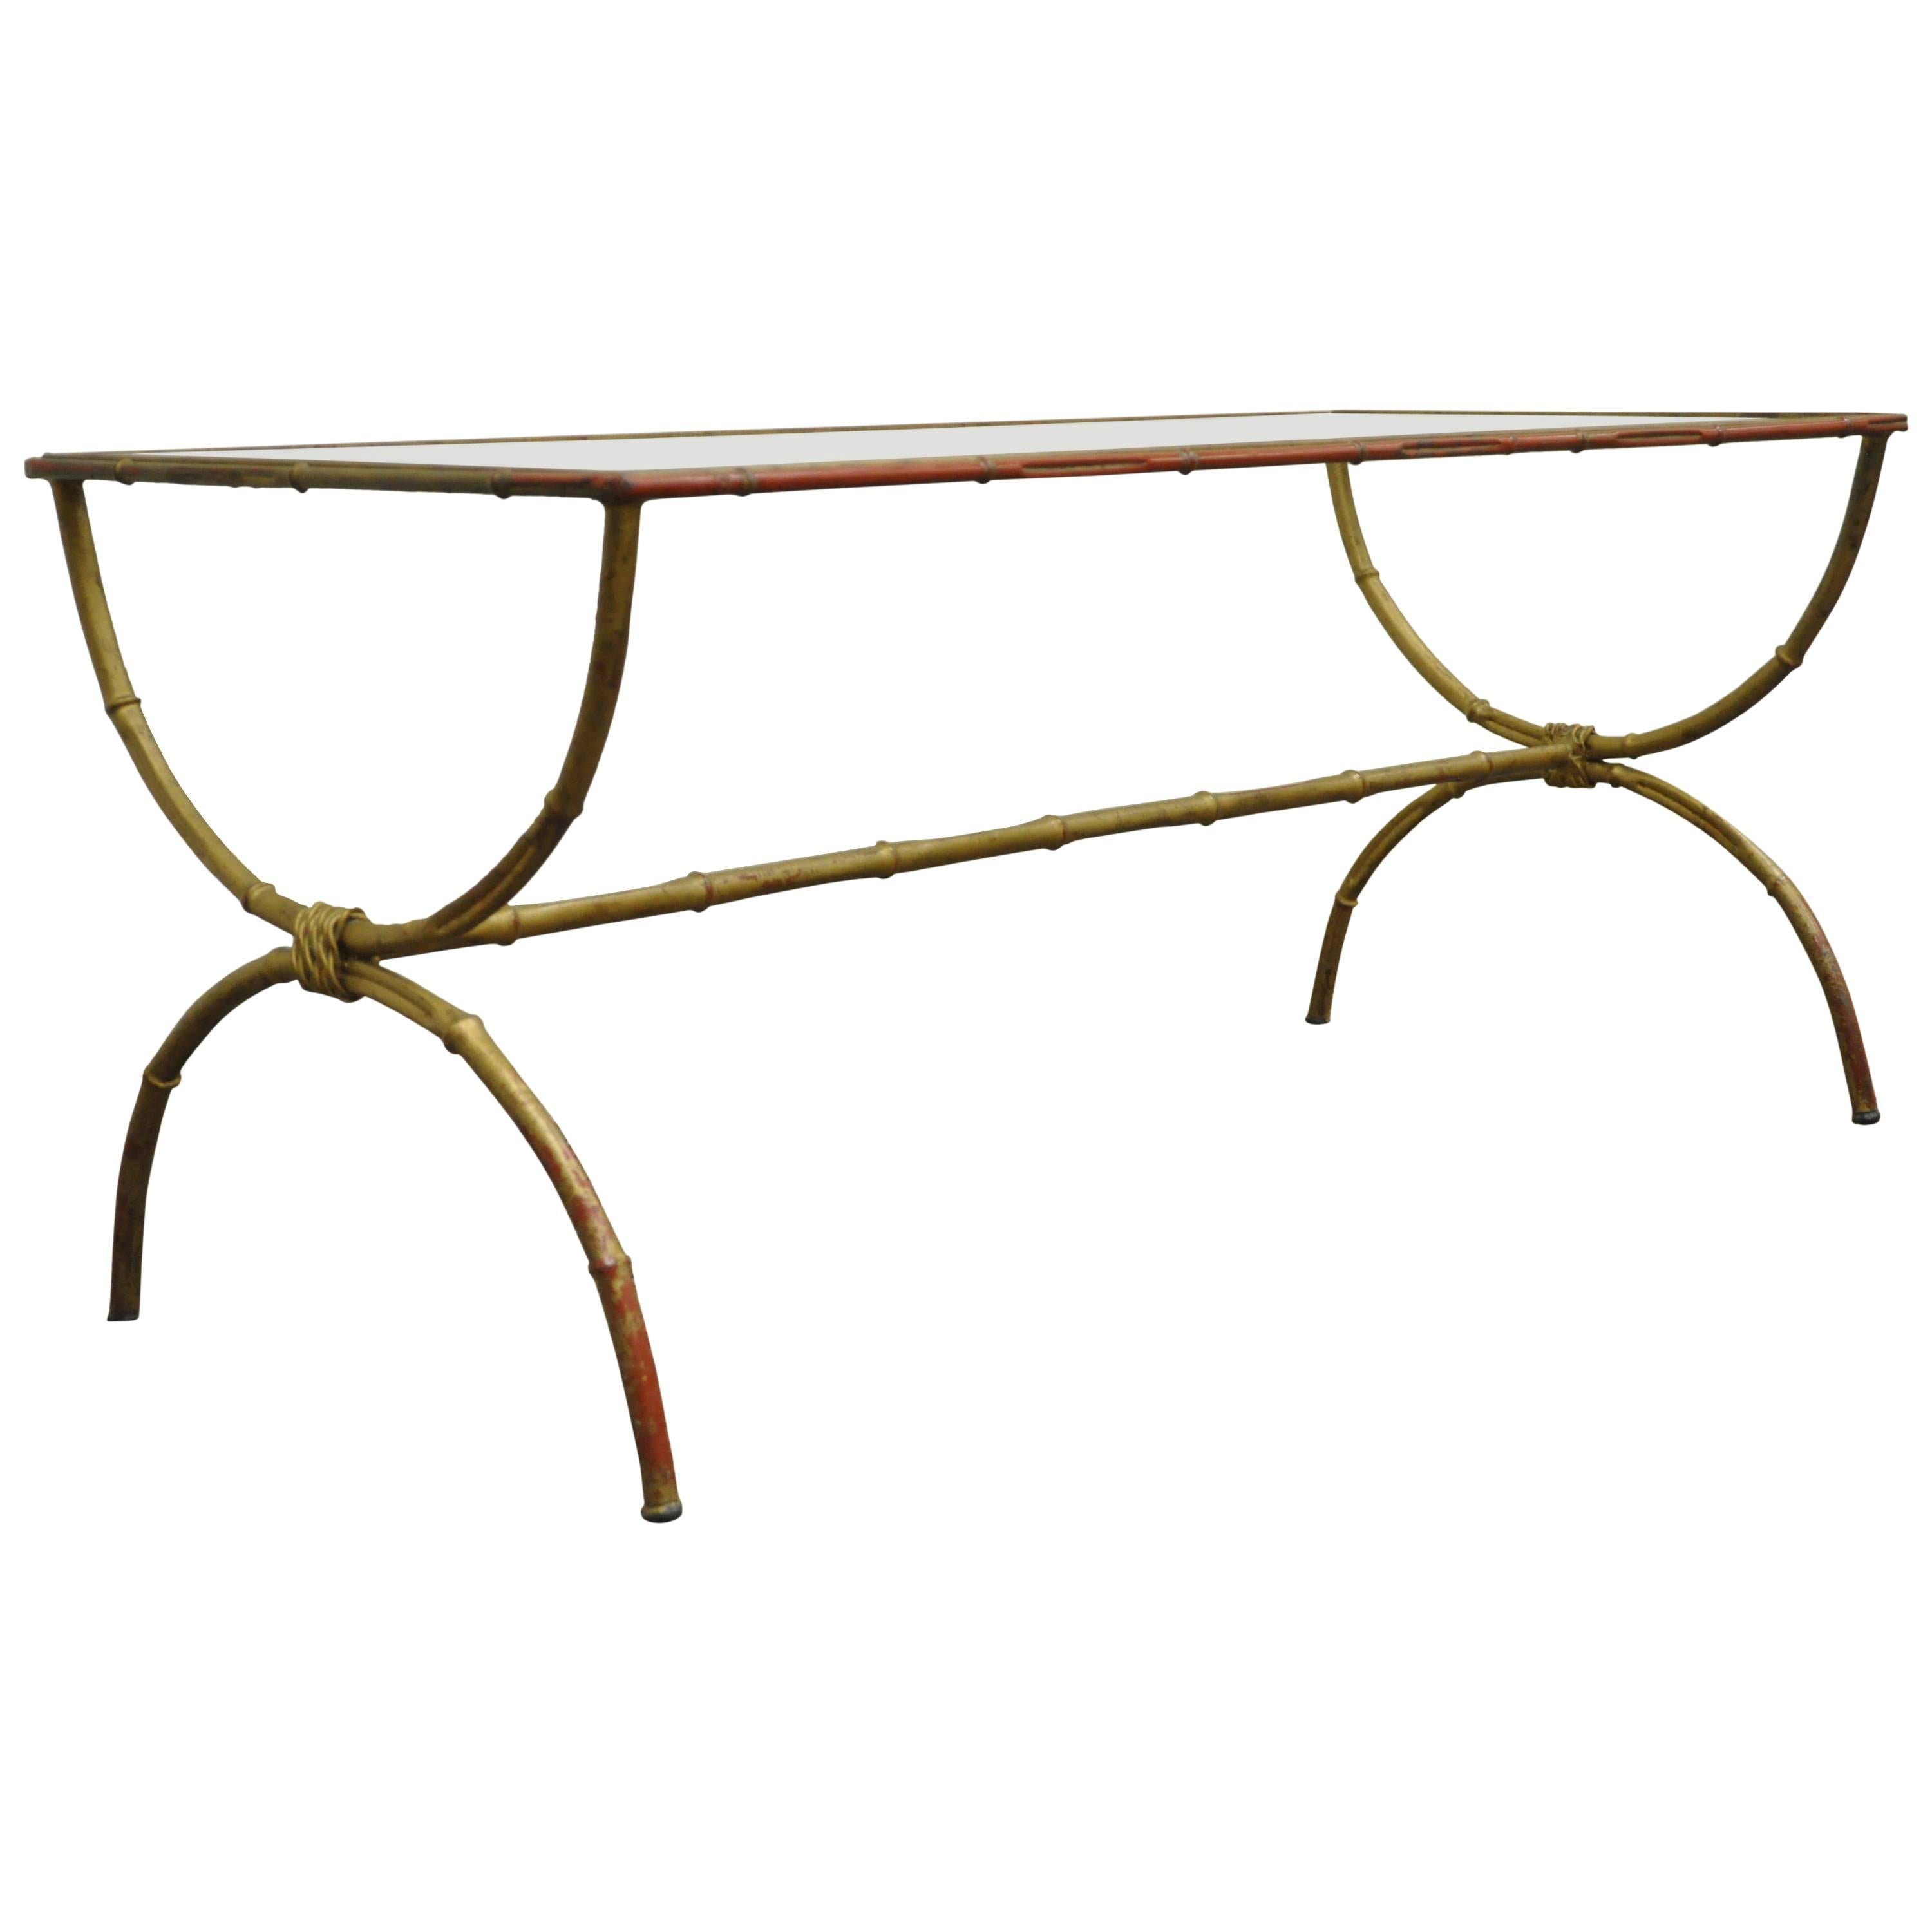 Vintage 1940s Italian Gold Gilt Iron Hollywood Regency Faux Bamboo Coffee Table For Sale